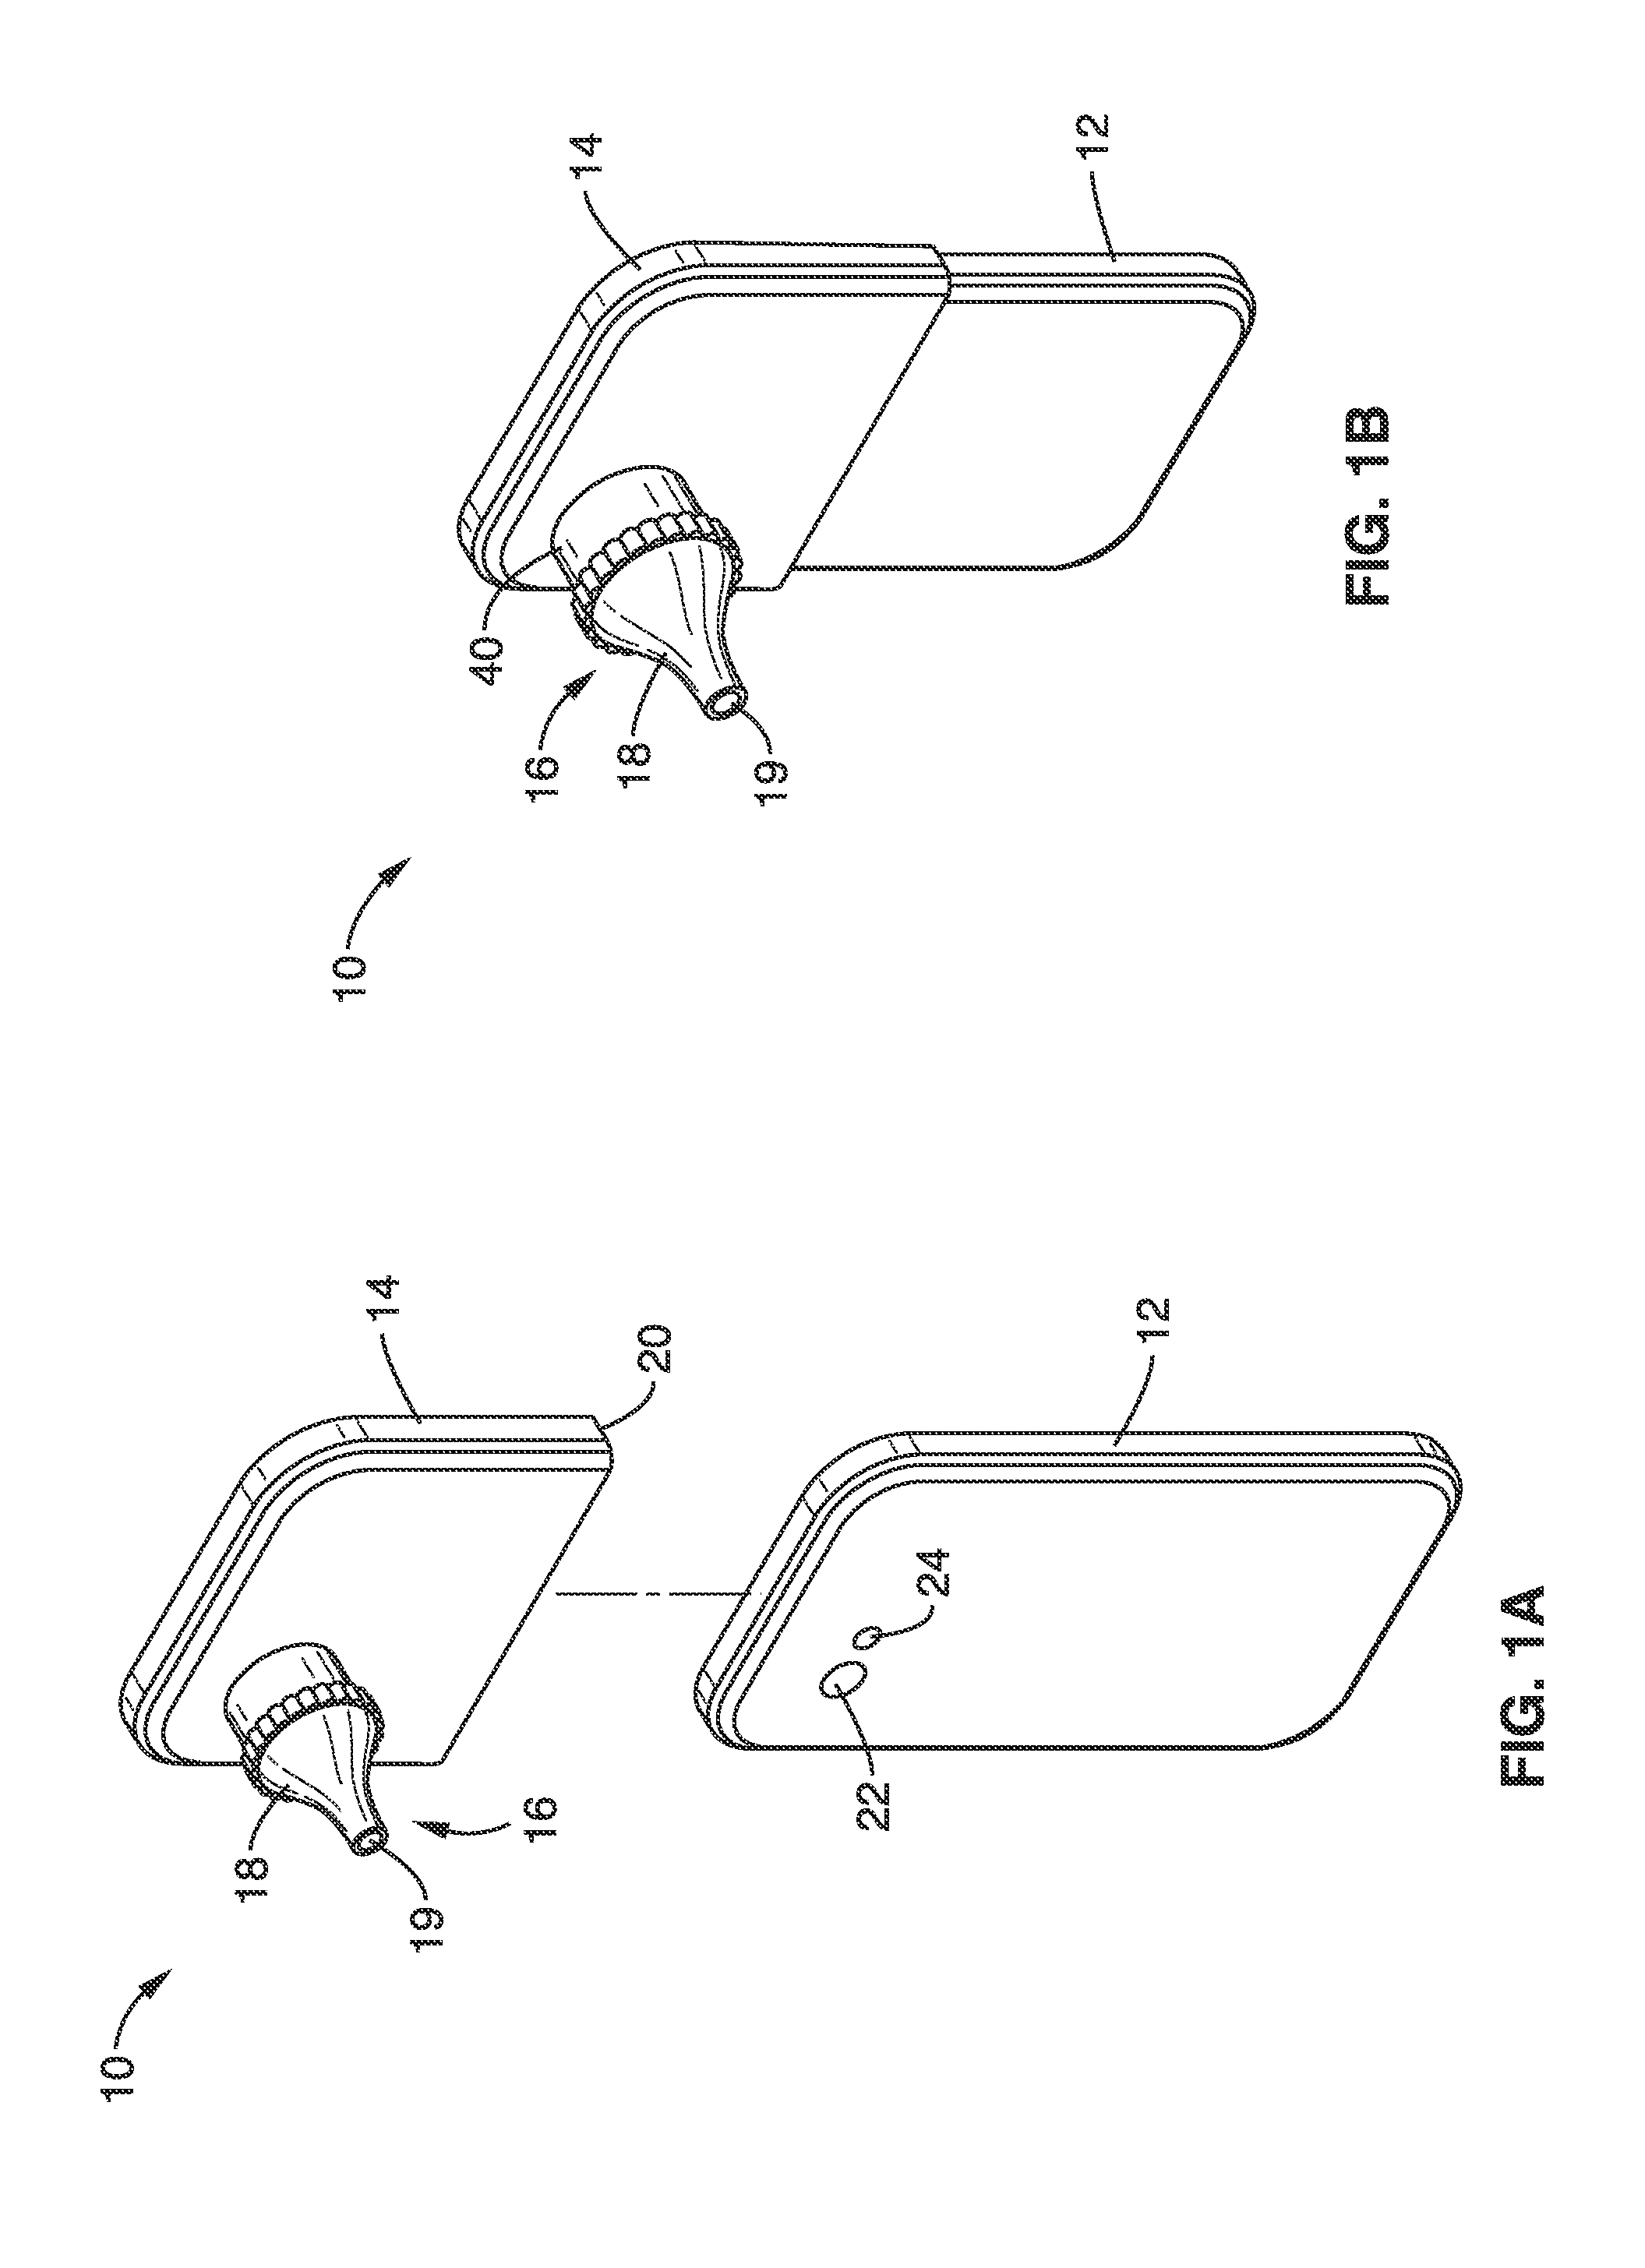 Cellscope apparatus and methods for imaging